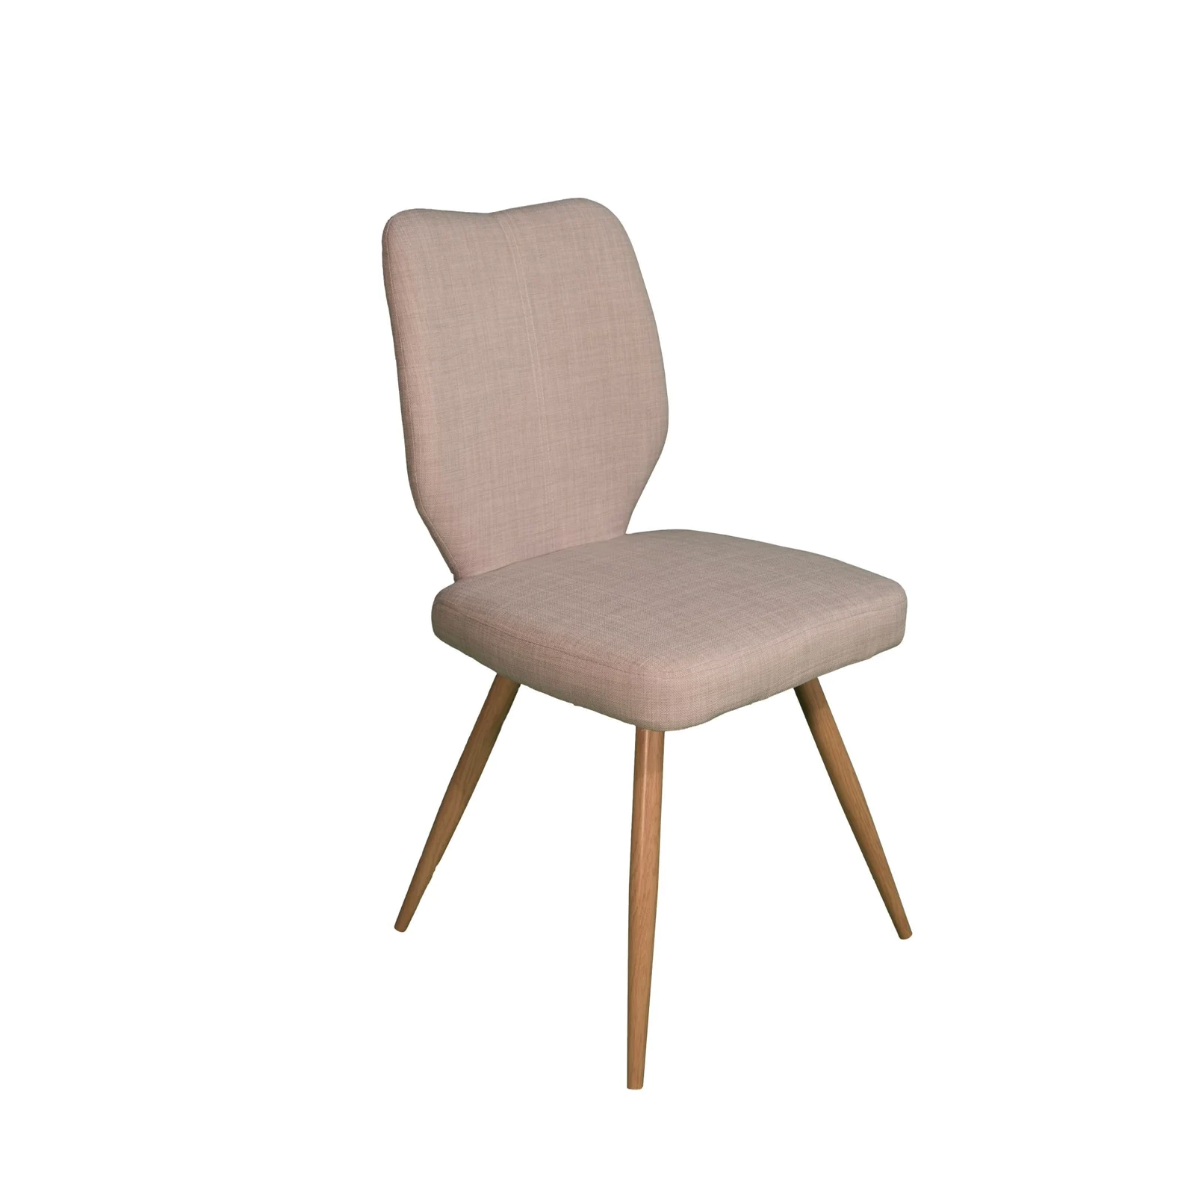 Malmo Dining Chair Ivory.